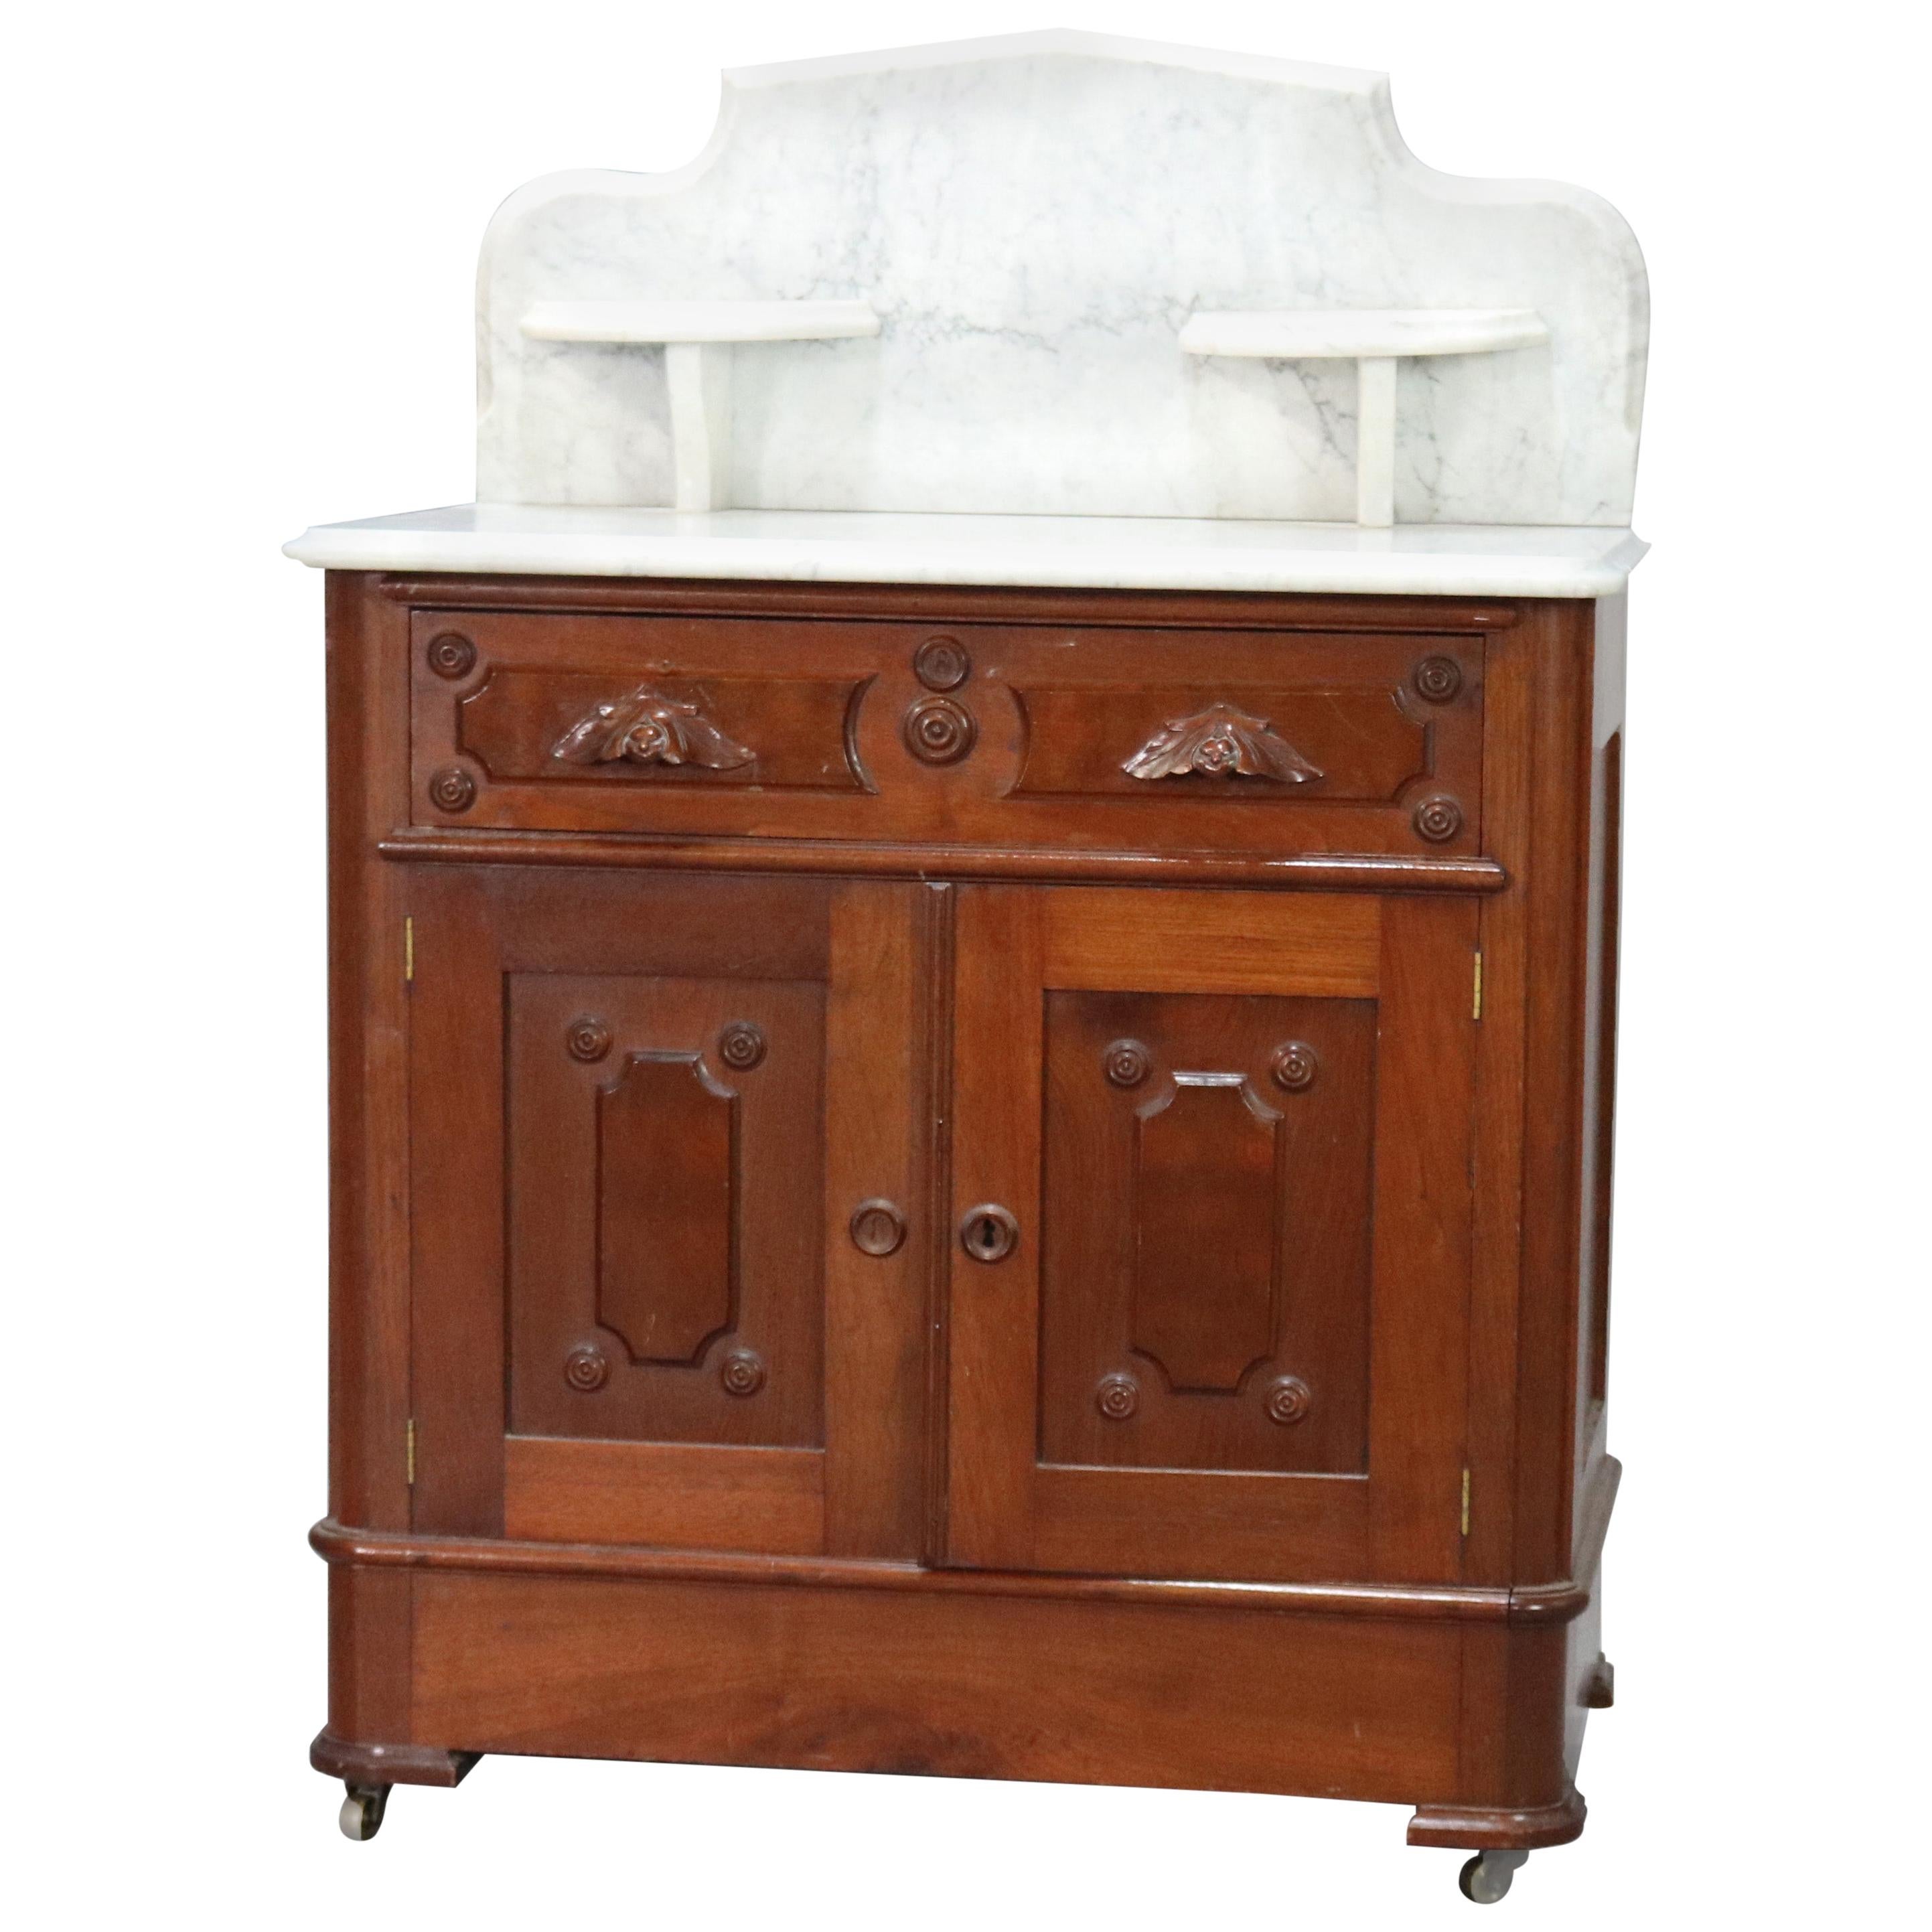 Antique Victorian Marble-Top Walnut Commode Washstand, circa 1890